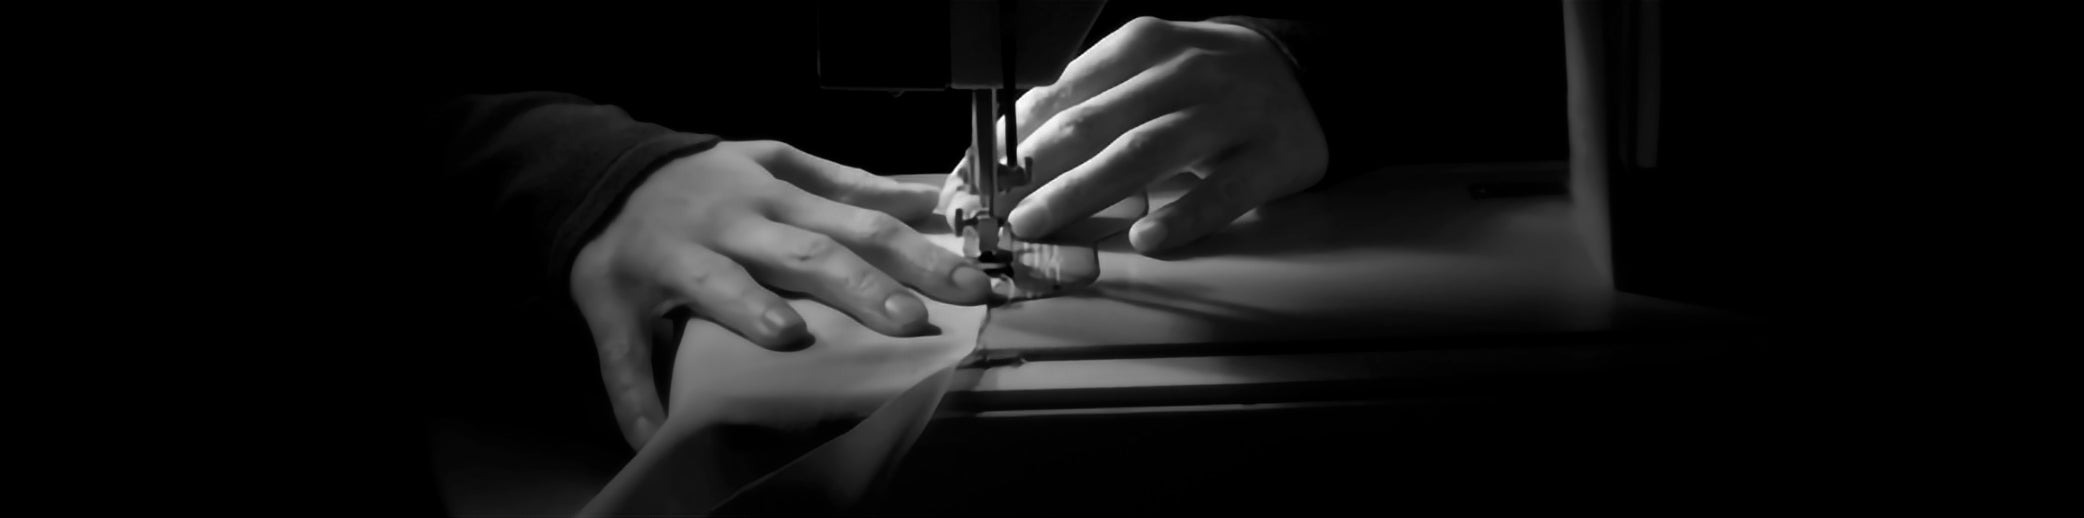 Hand Holding Down Fabric Under A Needle Stitching Machine Sewing A Custom Tailored Suit